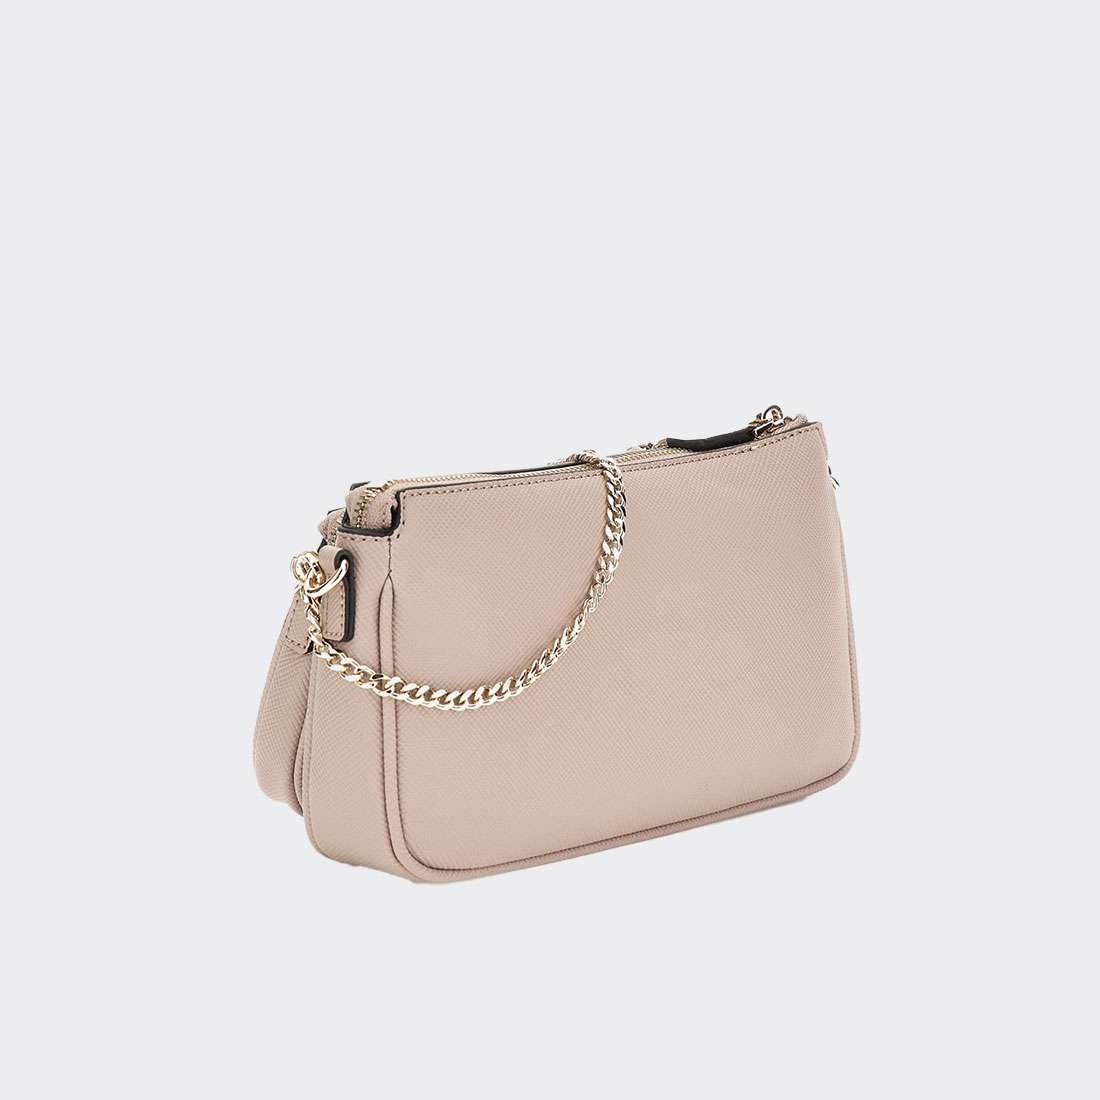 MALA GUESS NOELLE POUCH CROSSBODY TAUPE